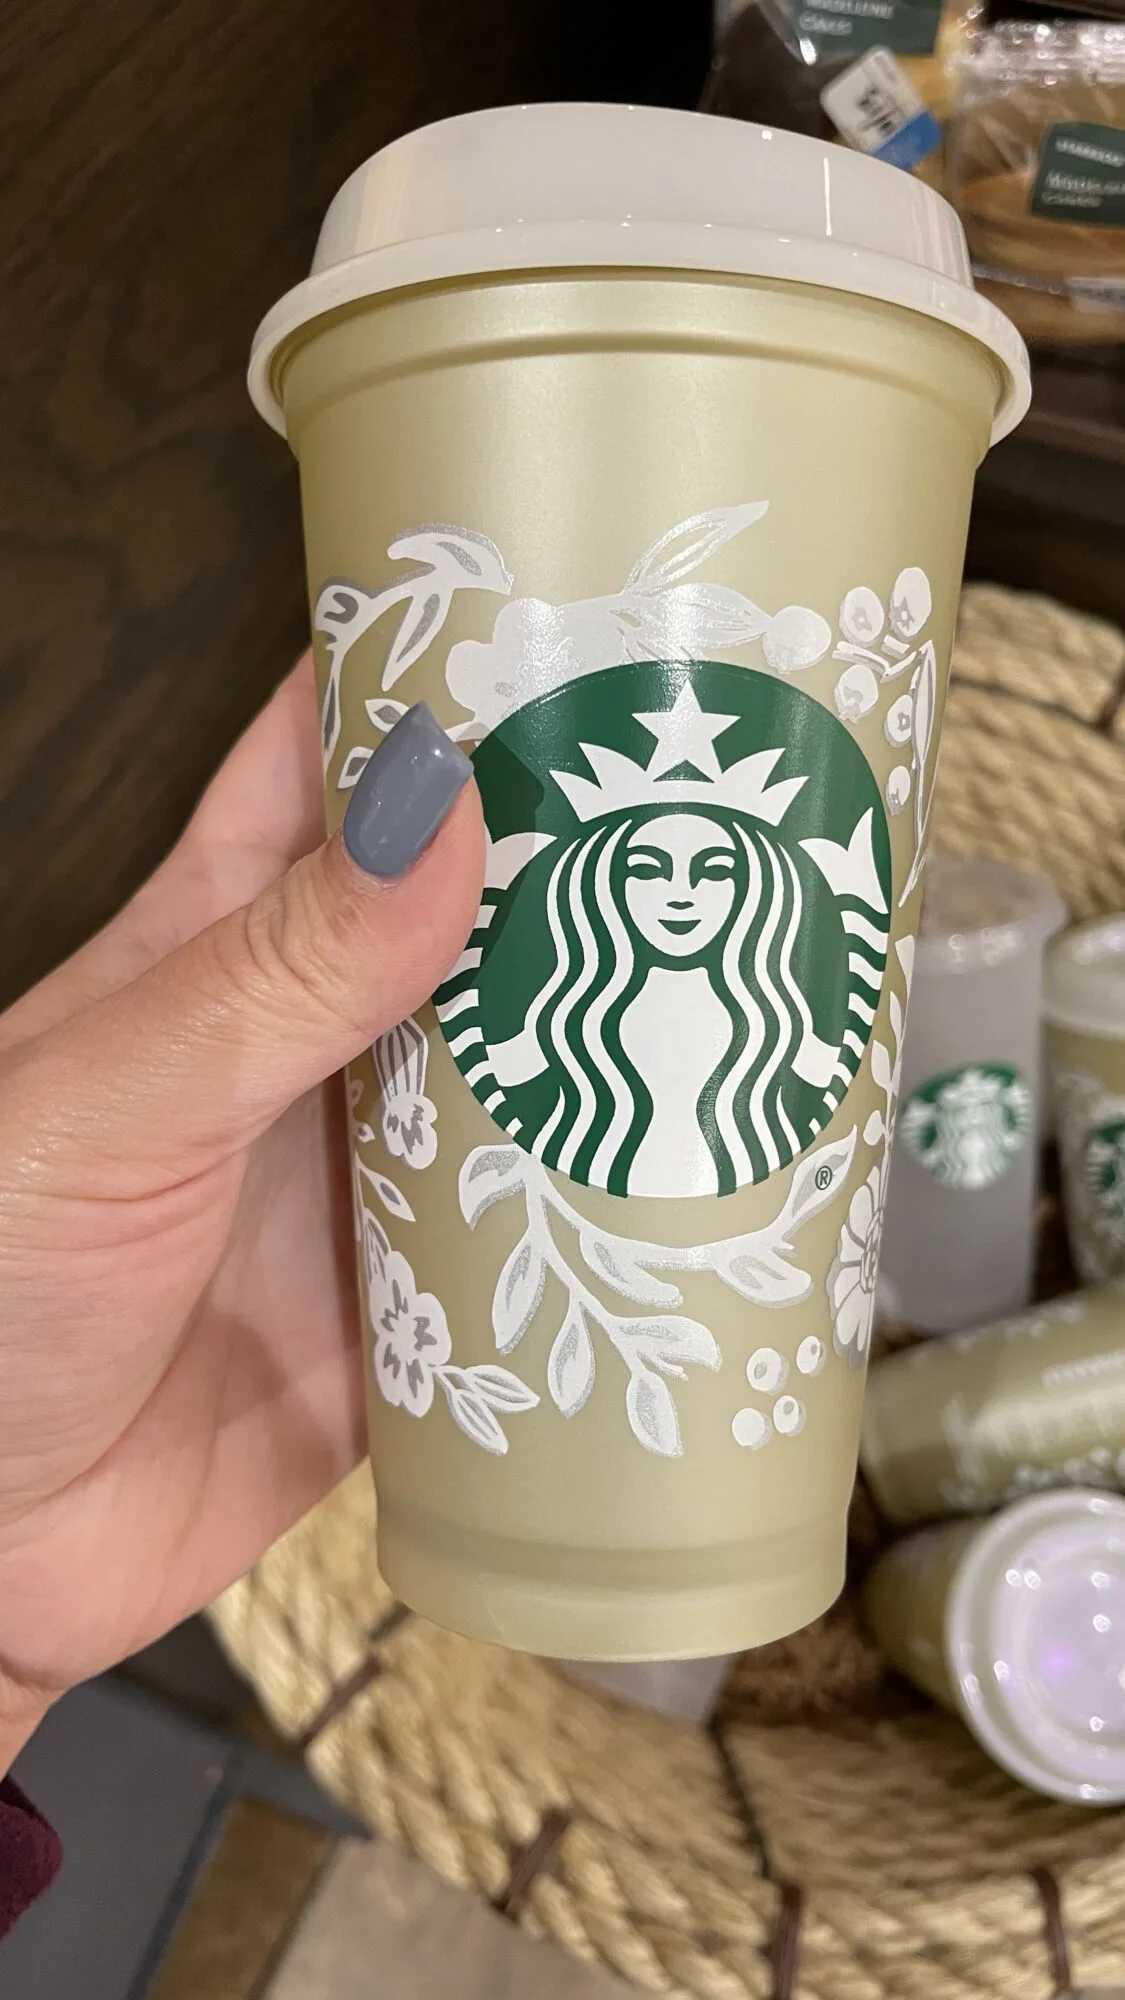 Starbucks Now Has Colored Reusable Cups